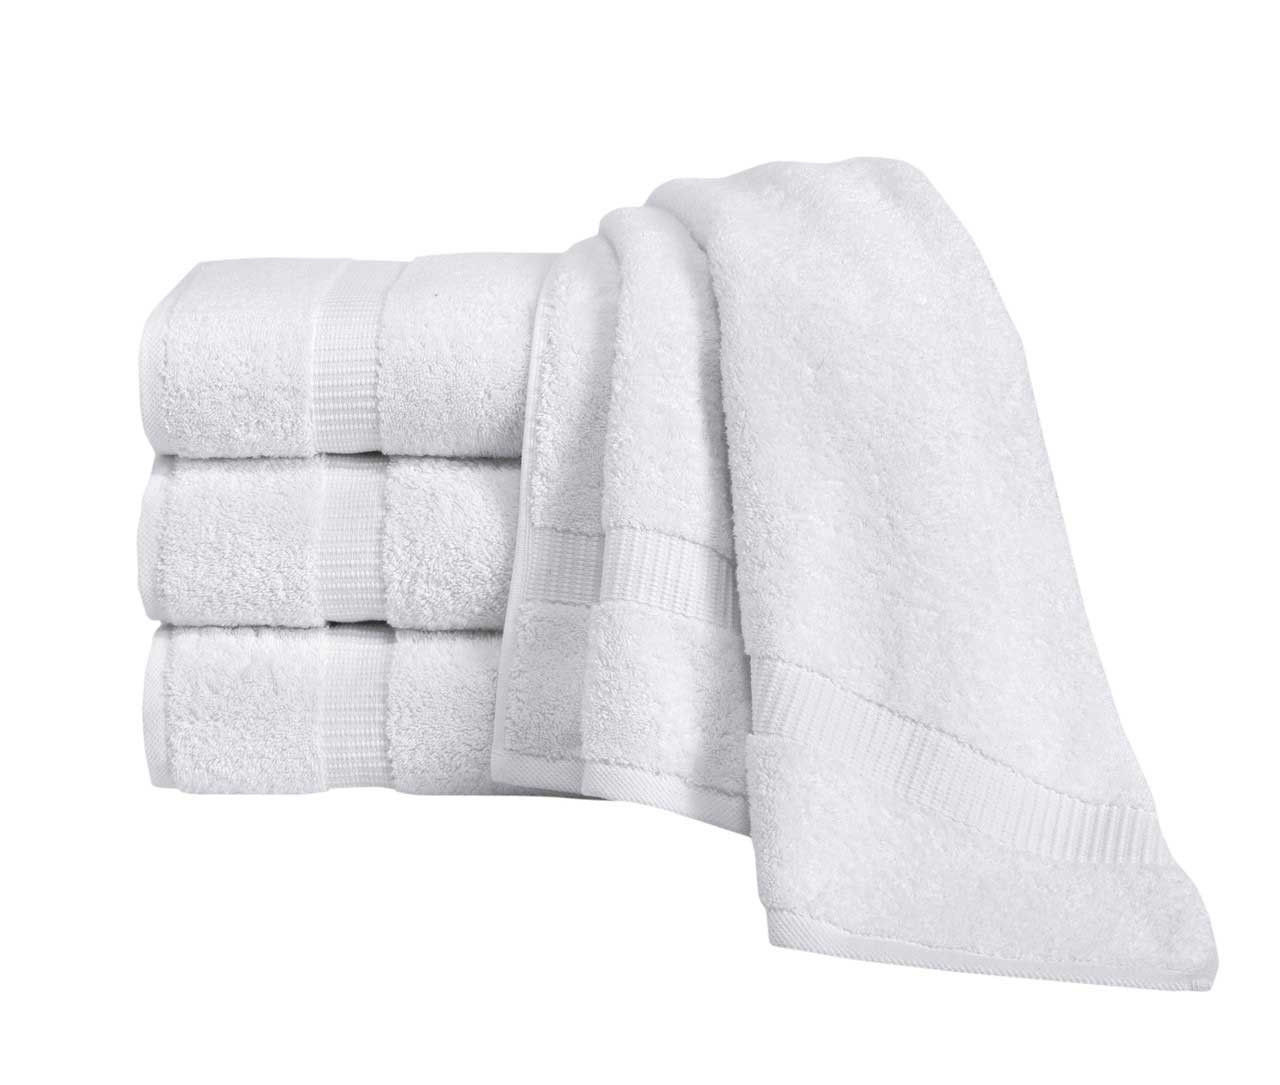 How would you rate the quality of the Royal Turkish White Towels Villa Collection?